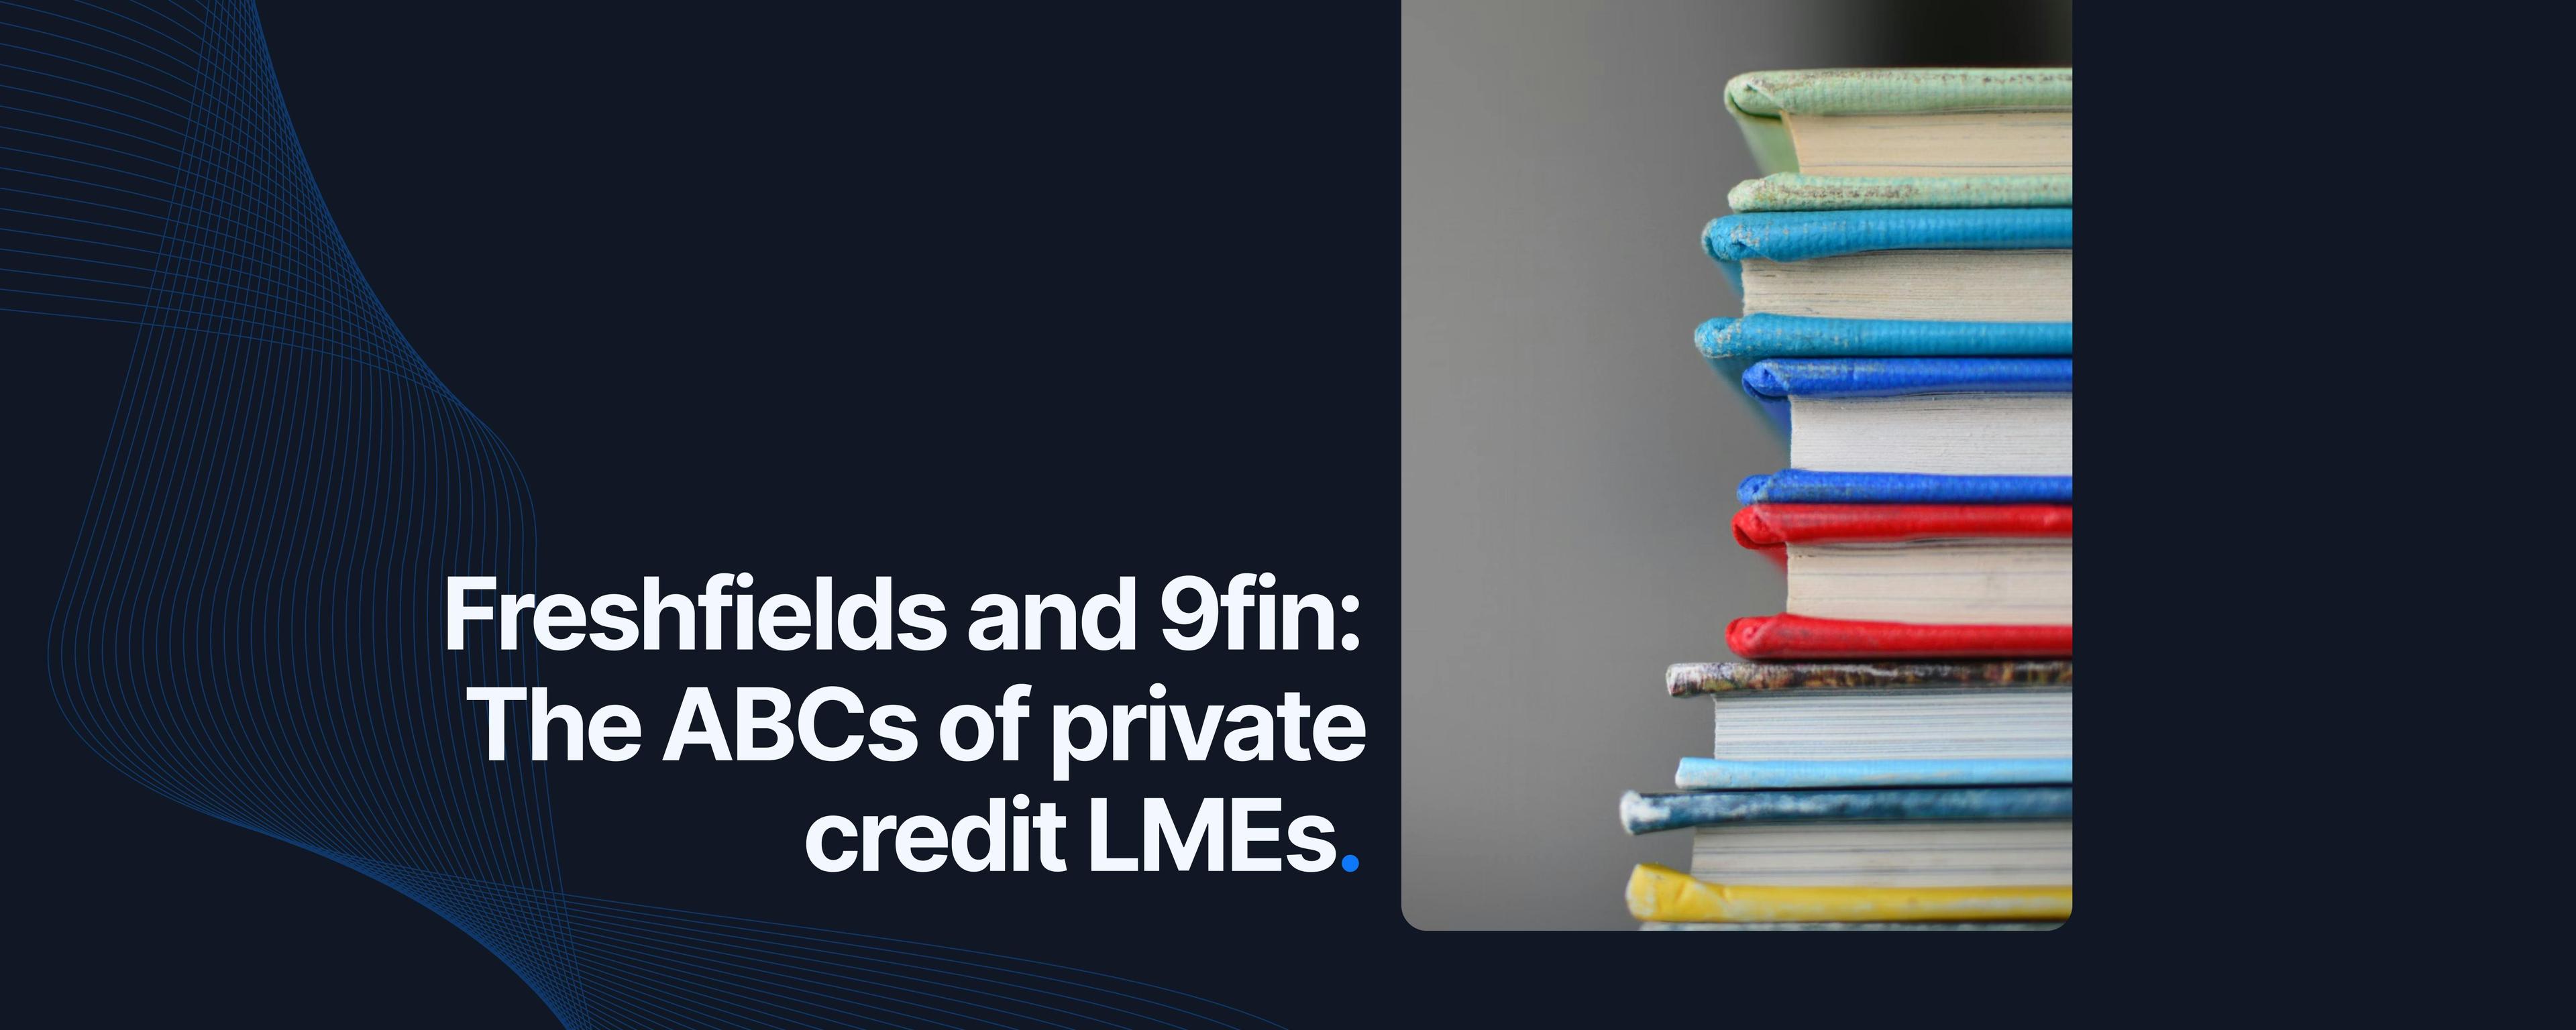 Freshfields and 9fin: The ABCs of private credit LMEs